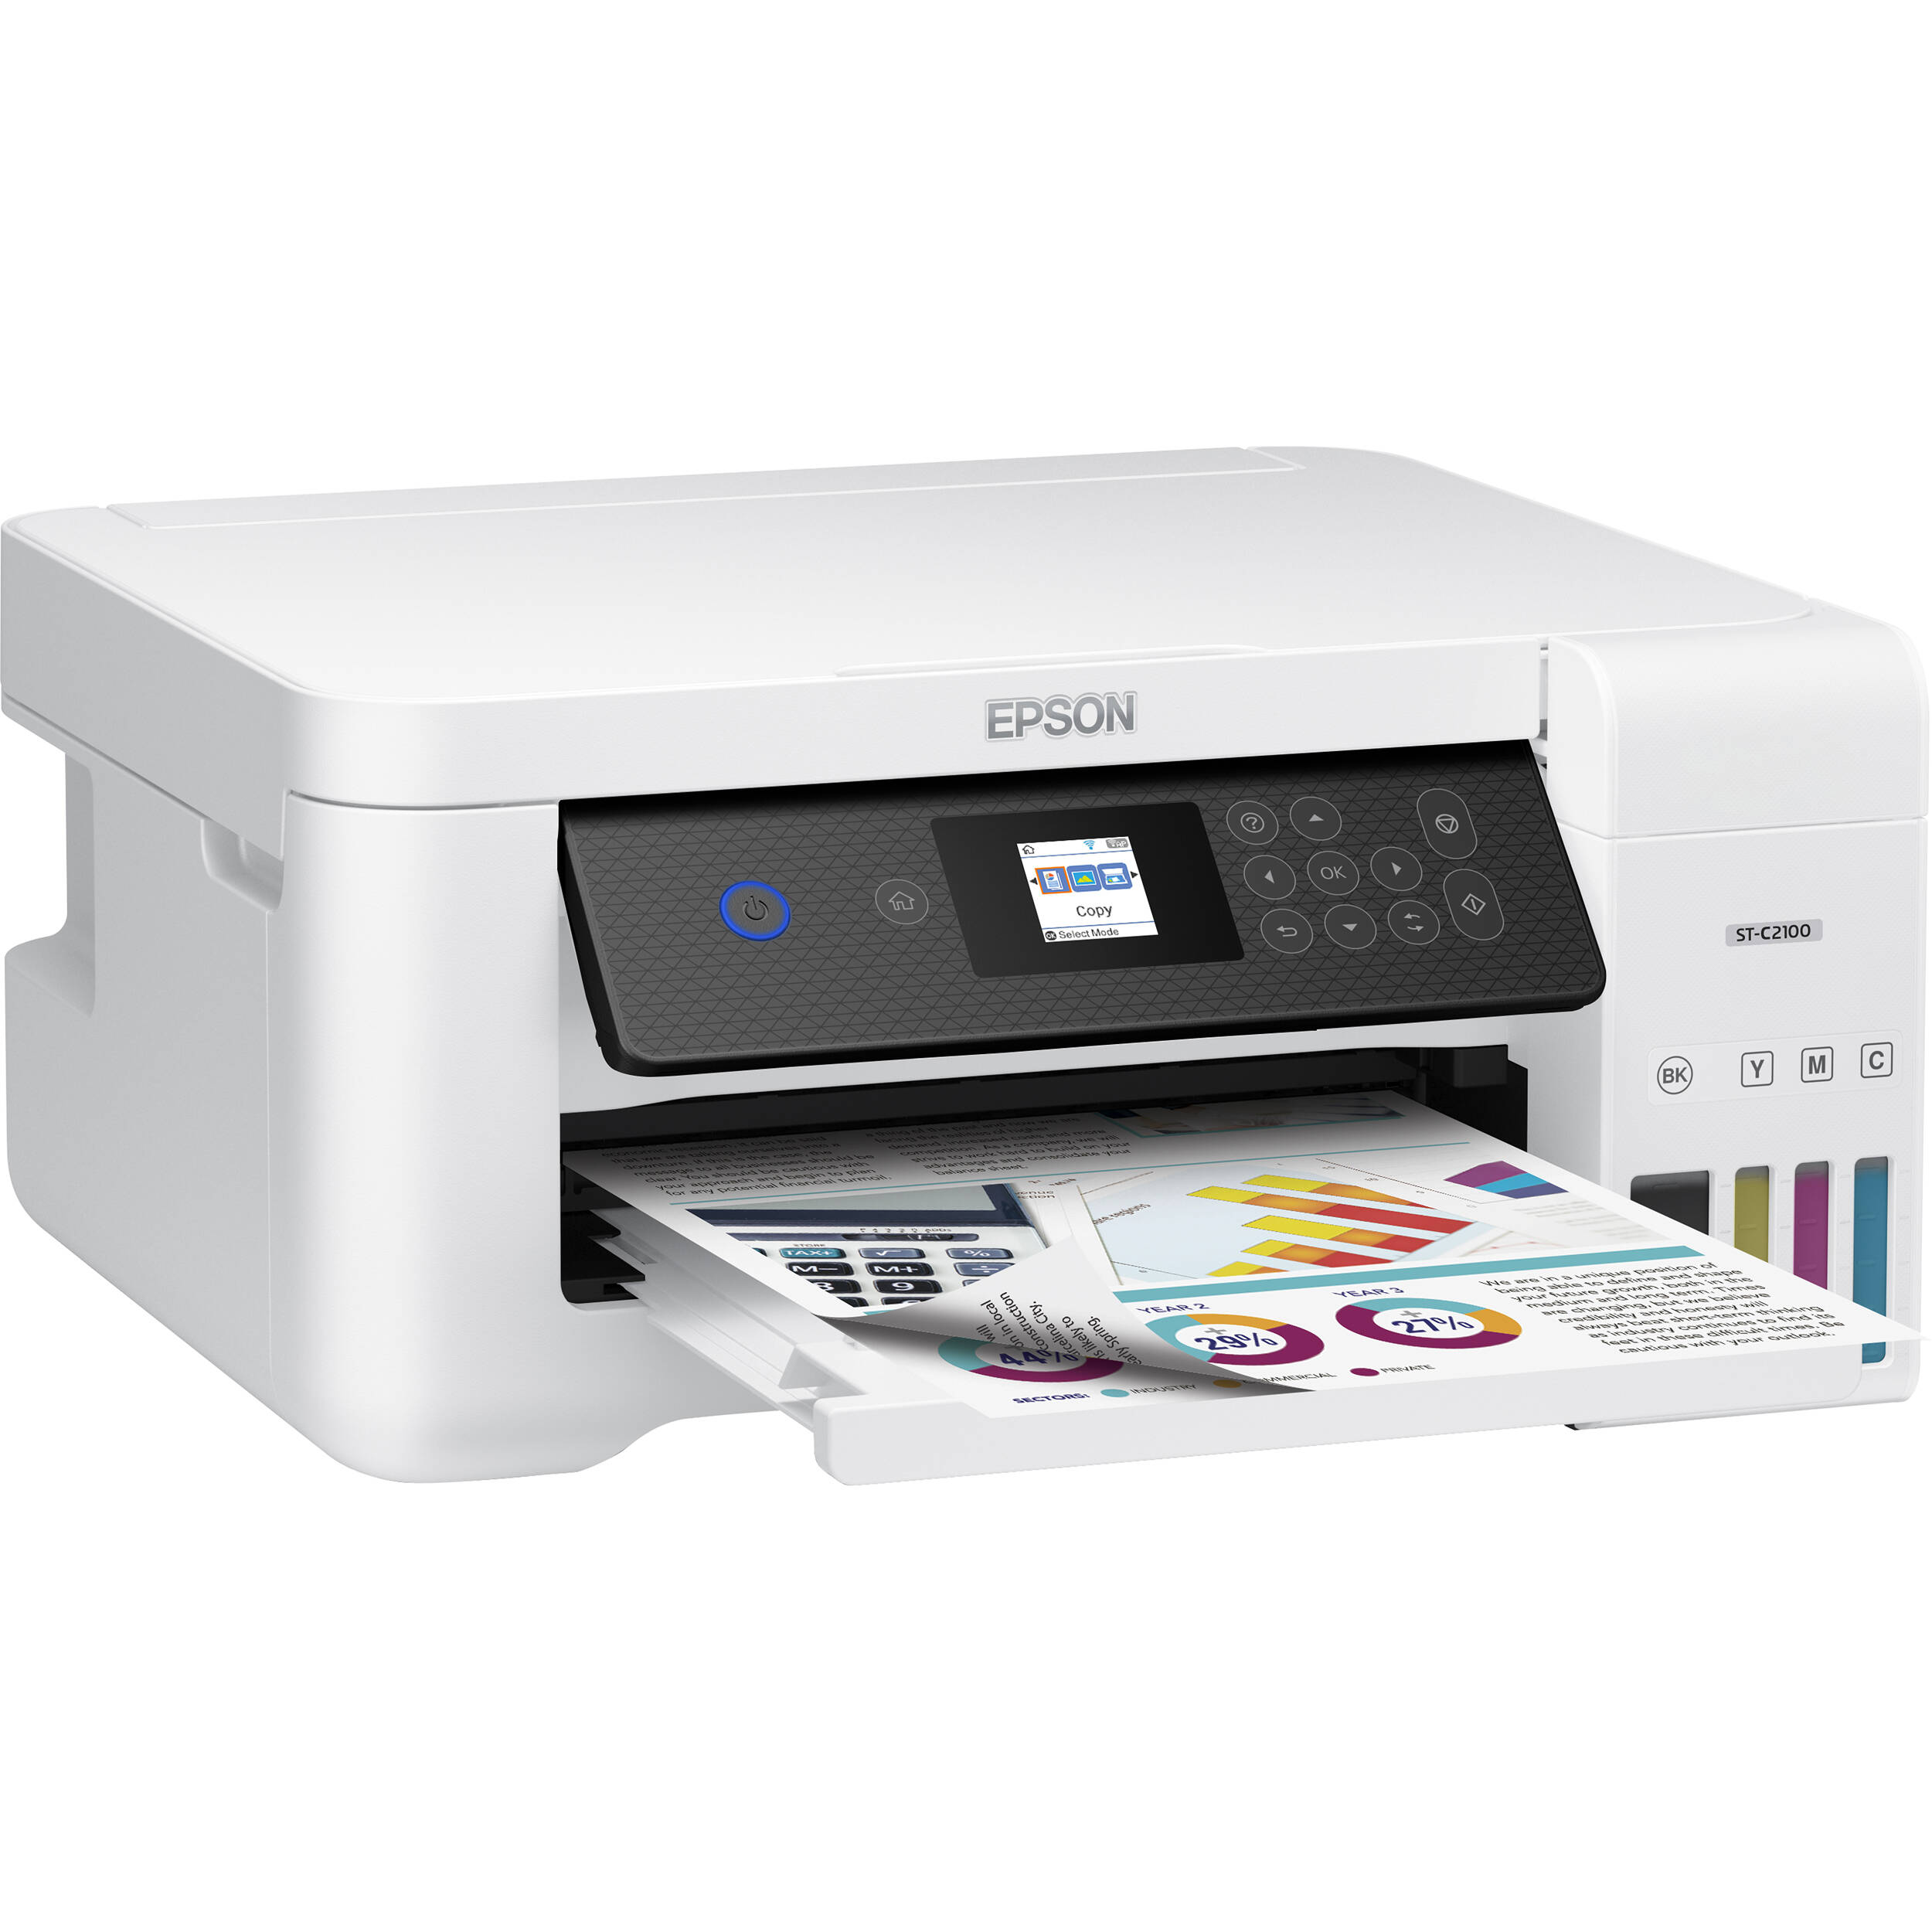 Saves Money With Epson WorkForce ST-C2100 Supertank Color MFP - Multifunction Printer